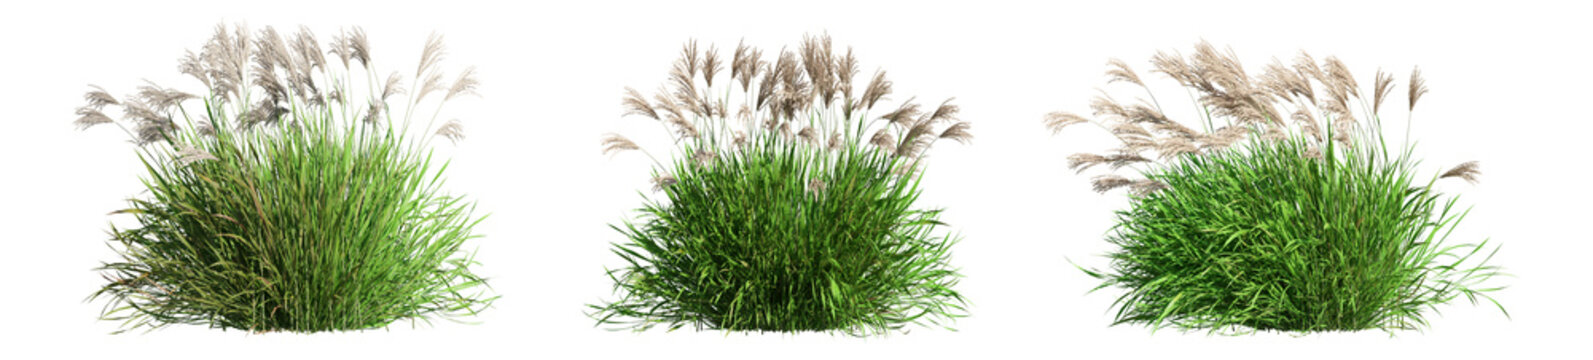 set of grass and bush with alpha mask, 3d rendering, for digital composition and architecture visualization